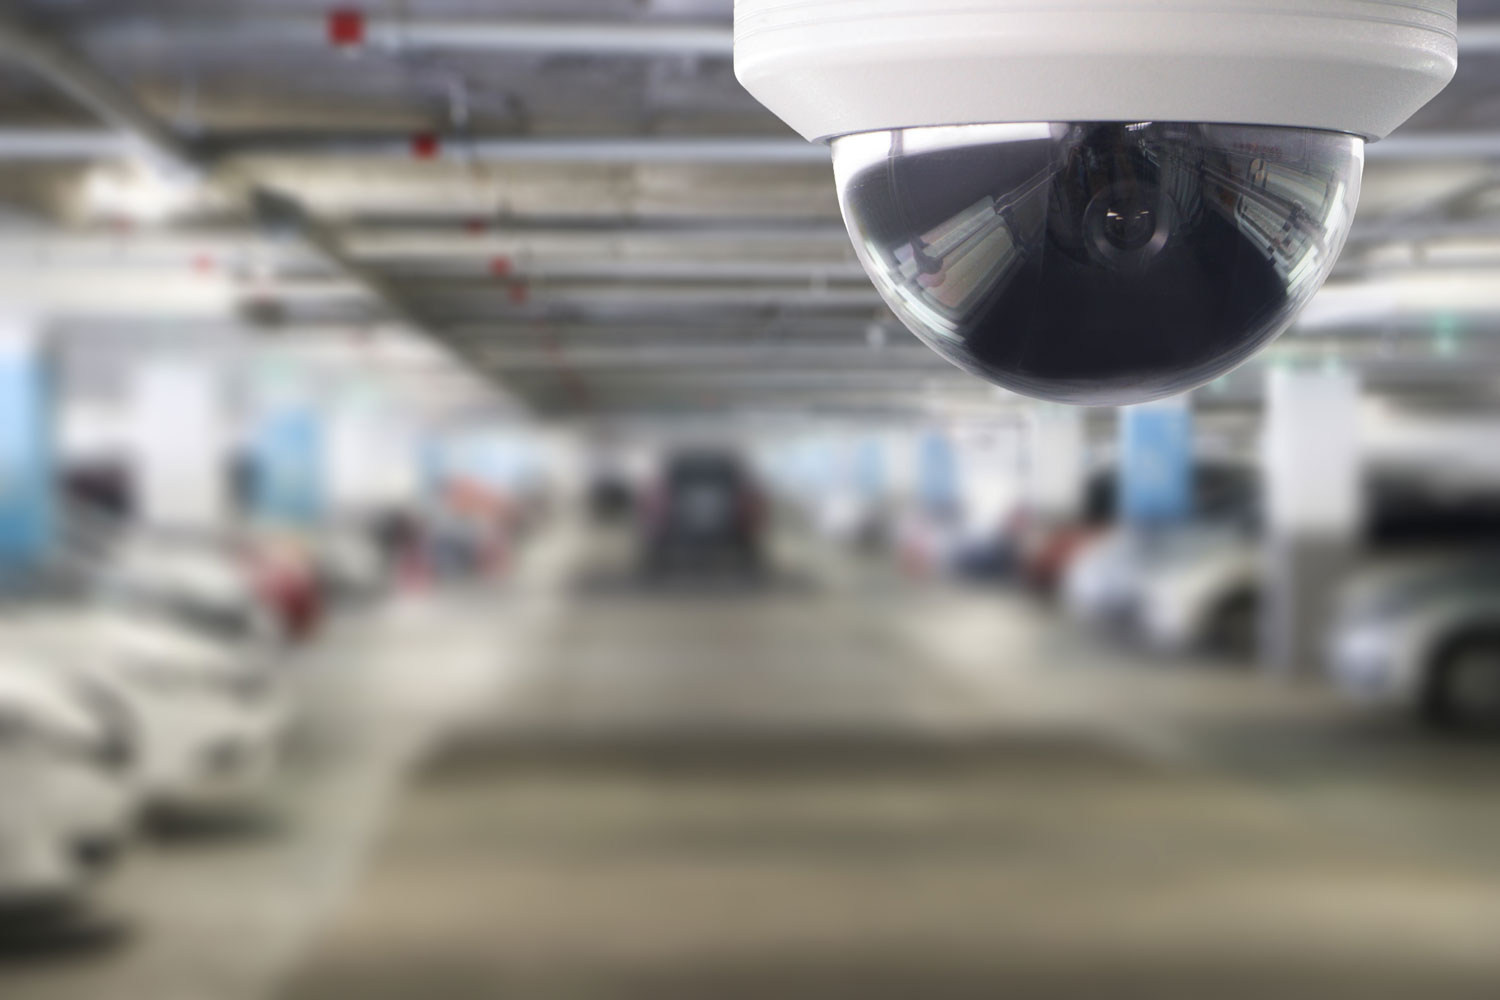 Installing one for your garage a security camera for safety purposes